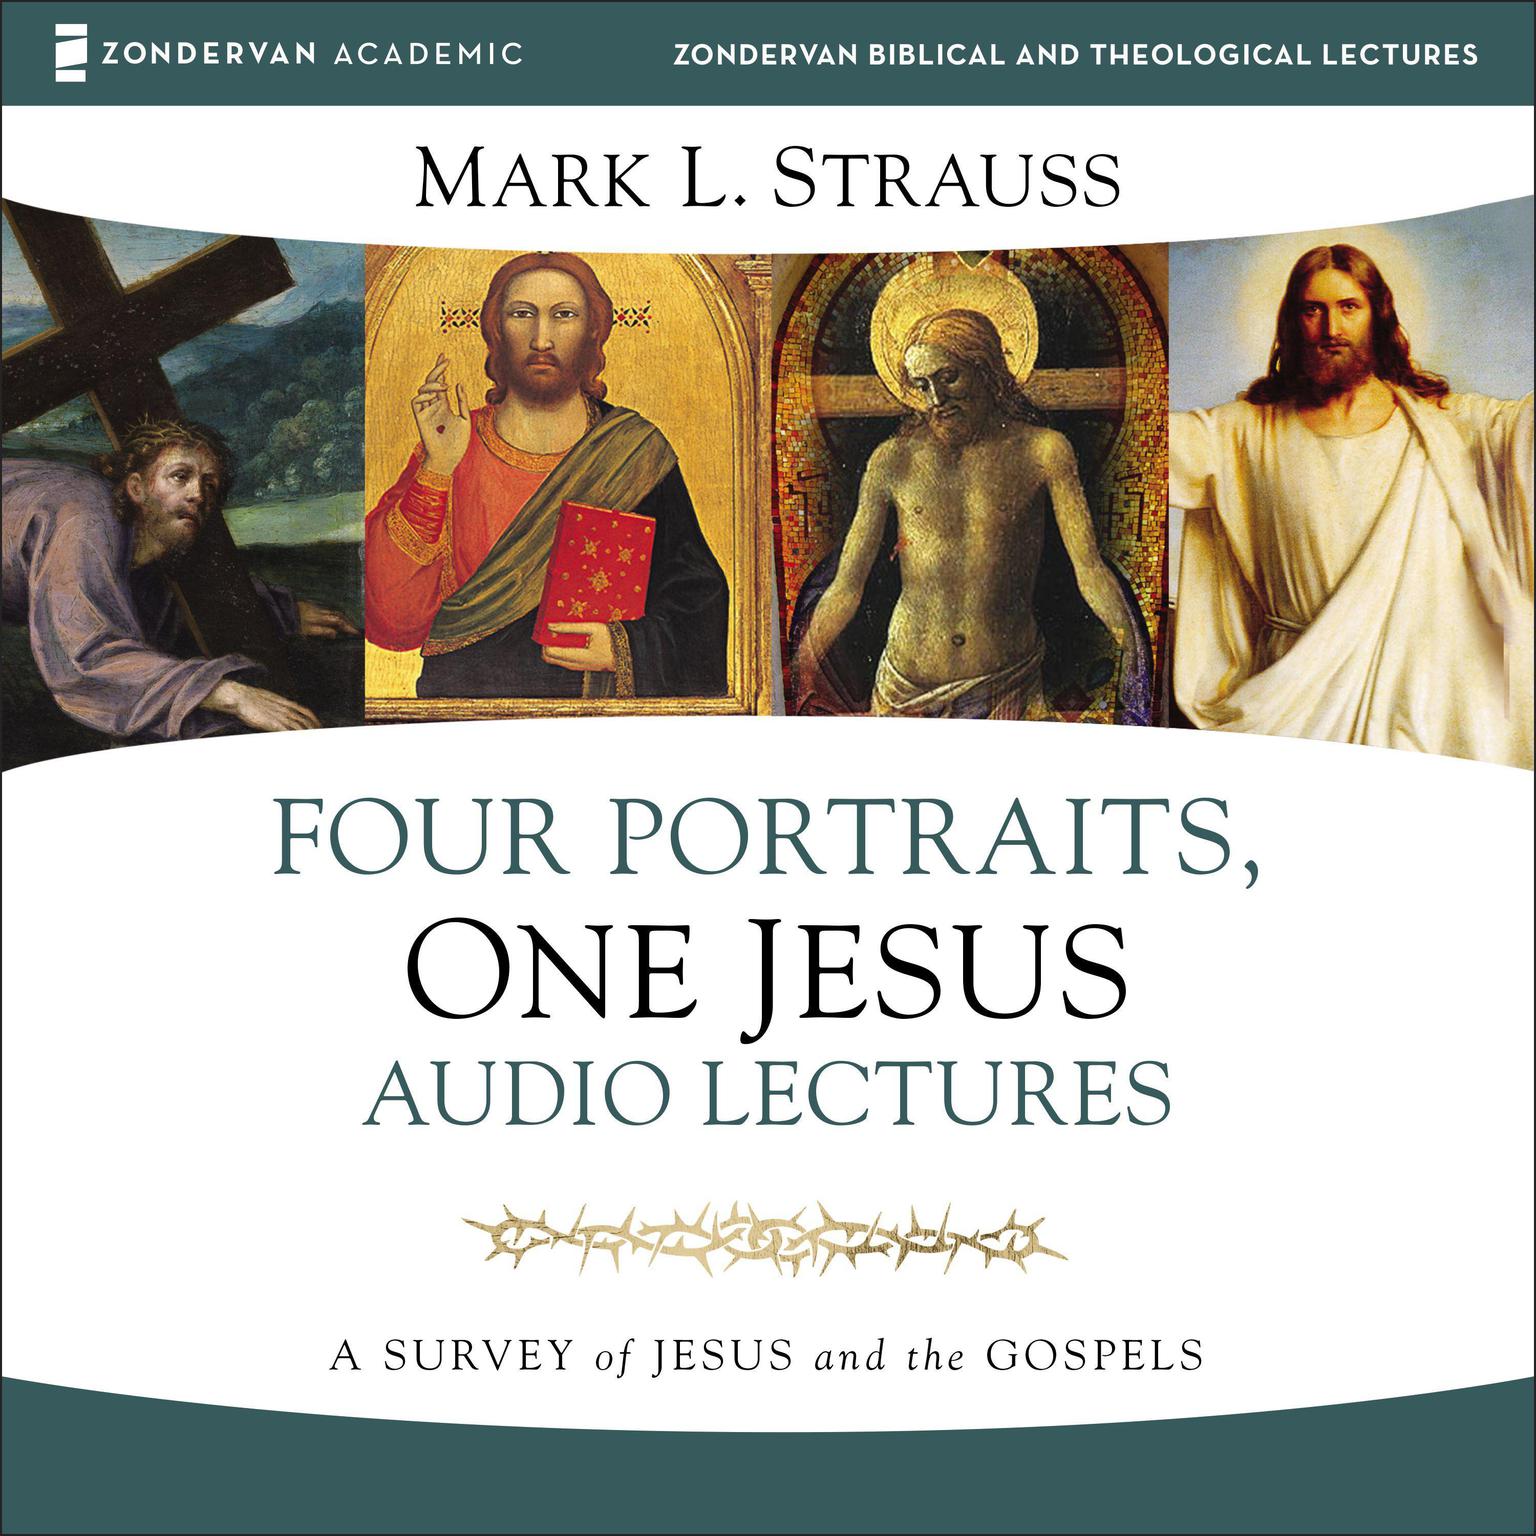 Four Portraits, One Jesus: Audio Lectures: A Survey of Jesus and the Gospels Audiobook, by Mark L. Strauss